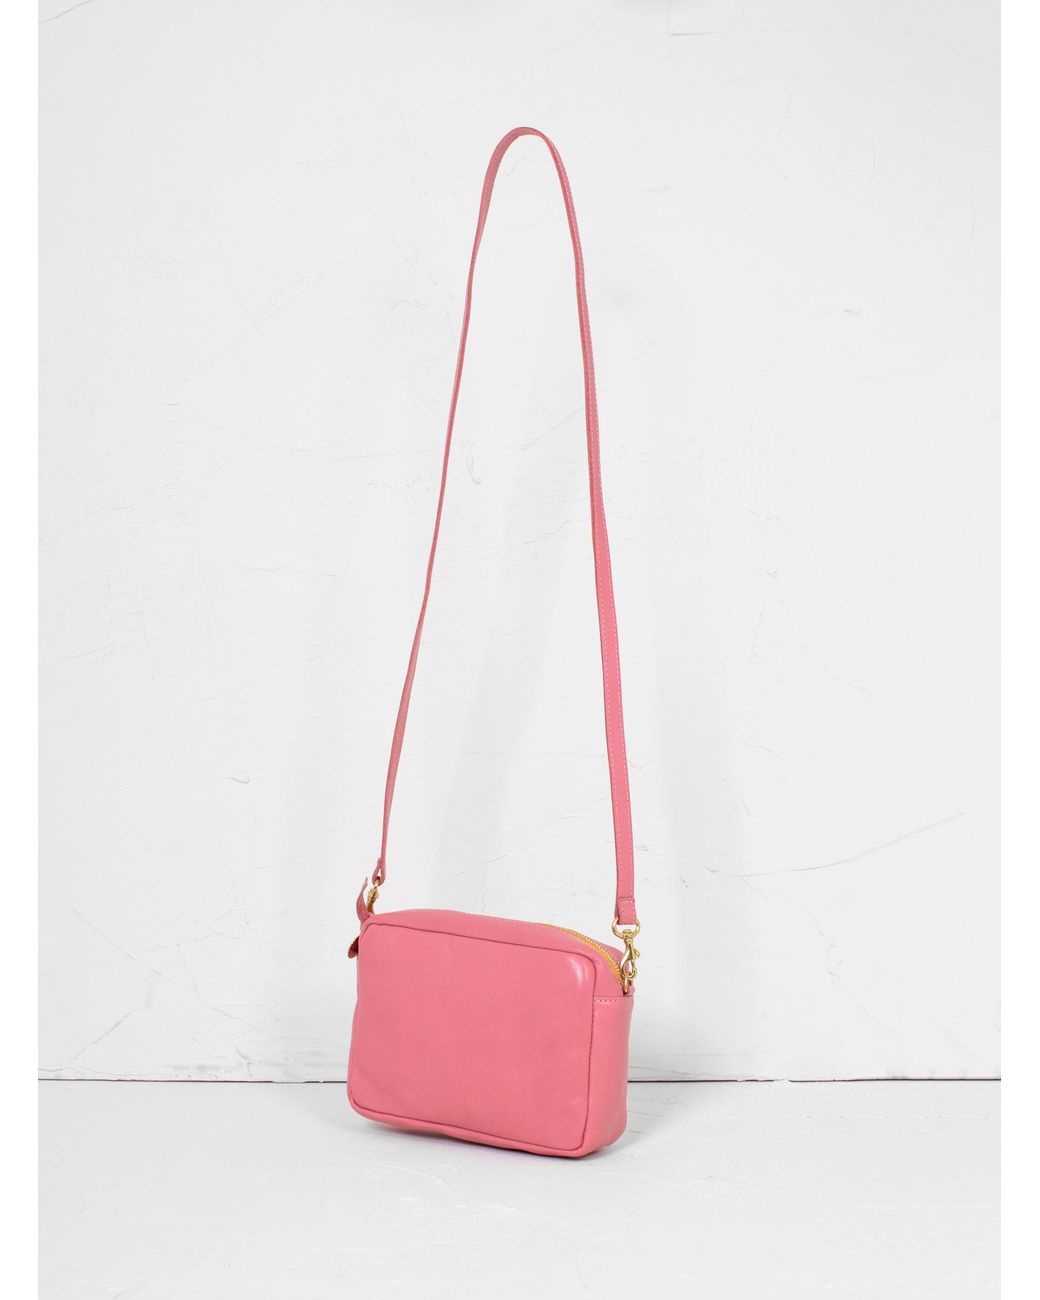 Clare V. Leather Tote Bag - Pink Totes, Handbags - W2436556